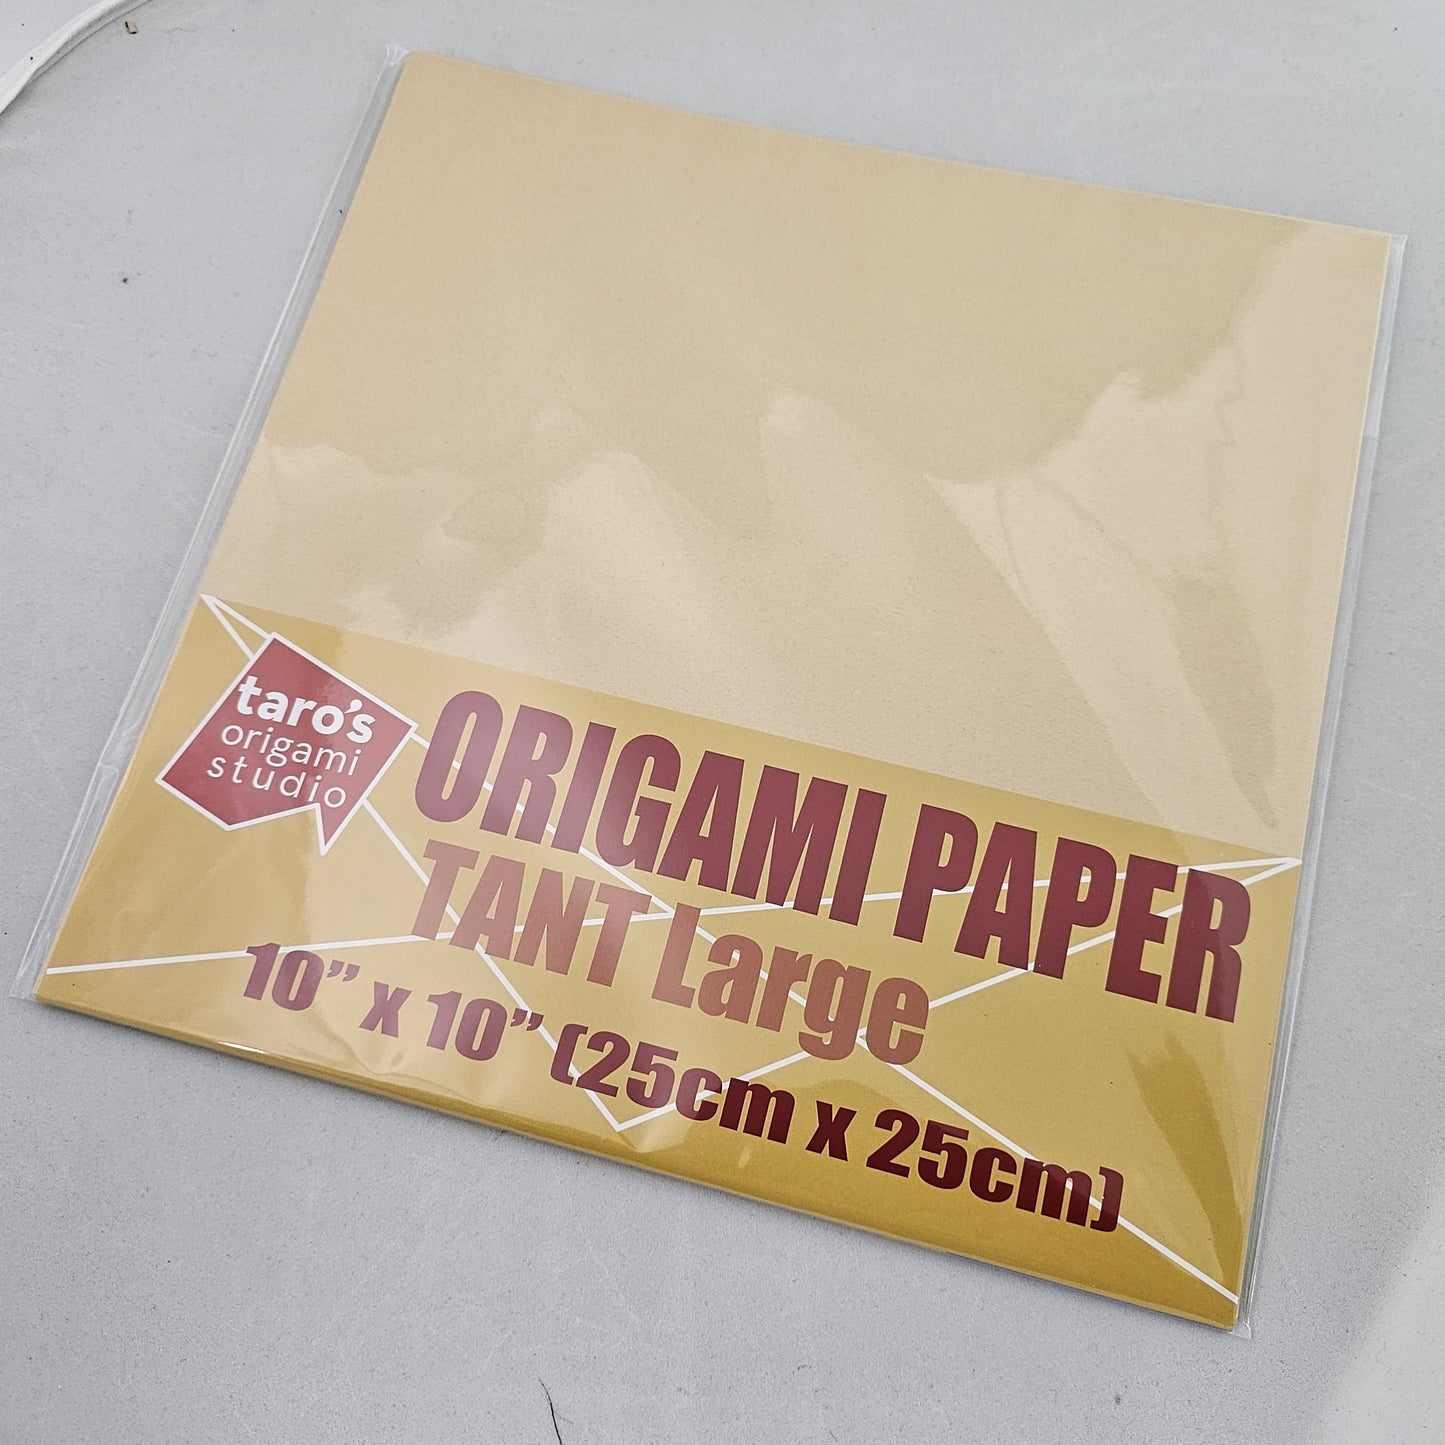 TANT Large 10 Inch (25 cm) Double Sided Single Color (Beige) 20 Sheets (All Same Color) for Origami Artist from Beginner to Expert (Made in Japan)